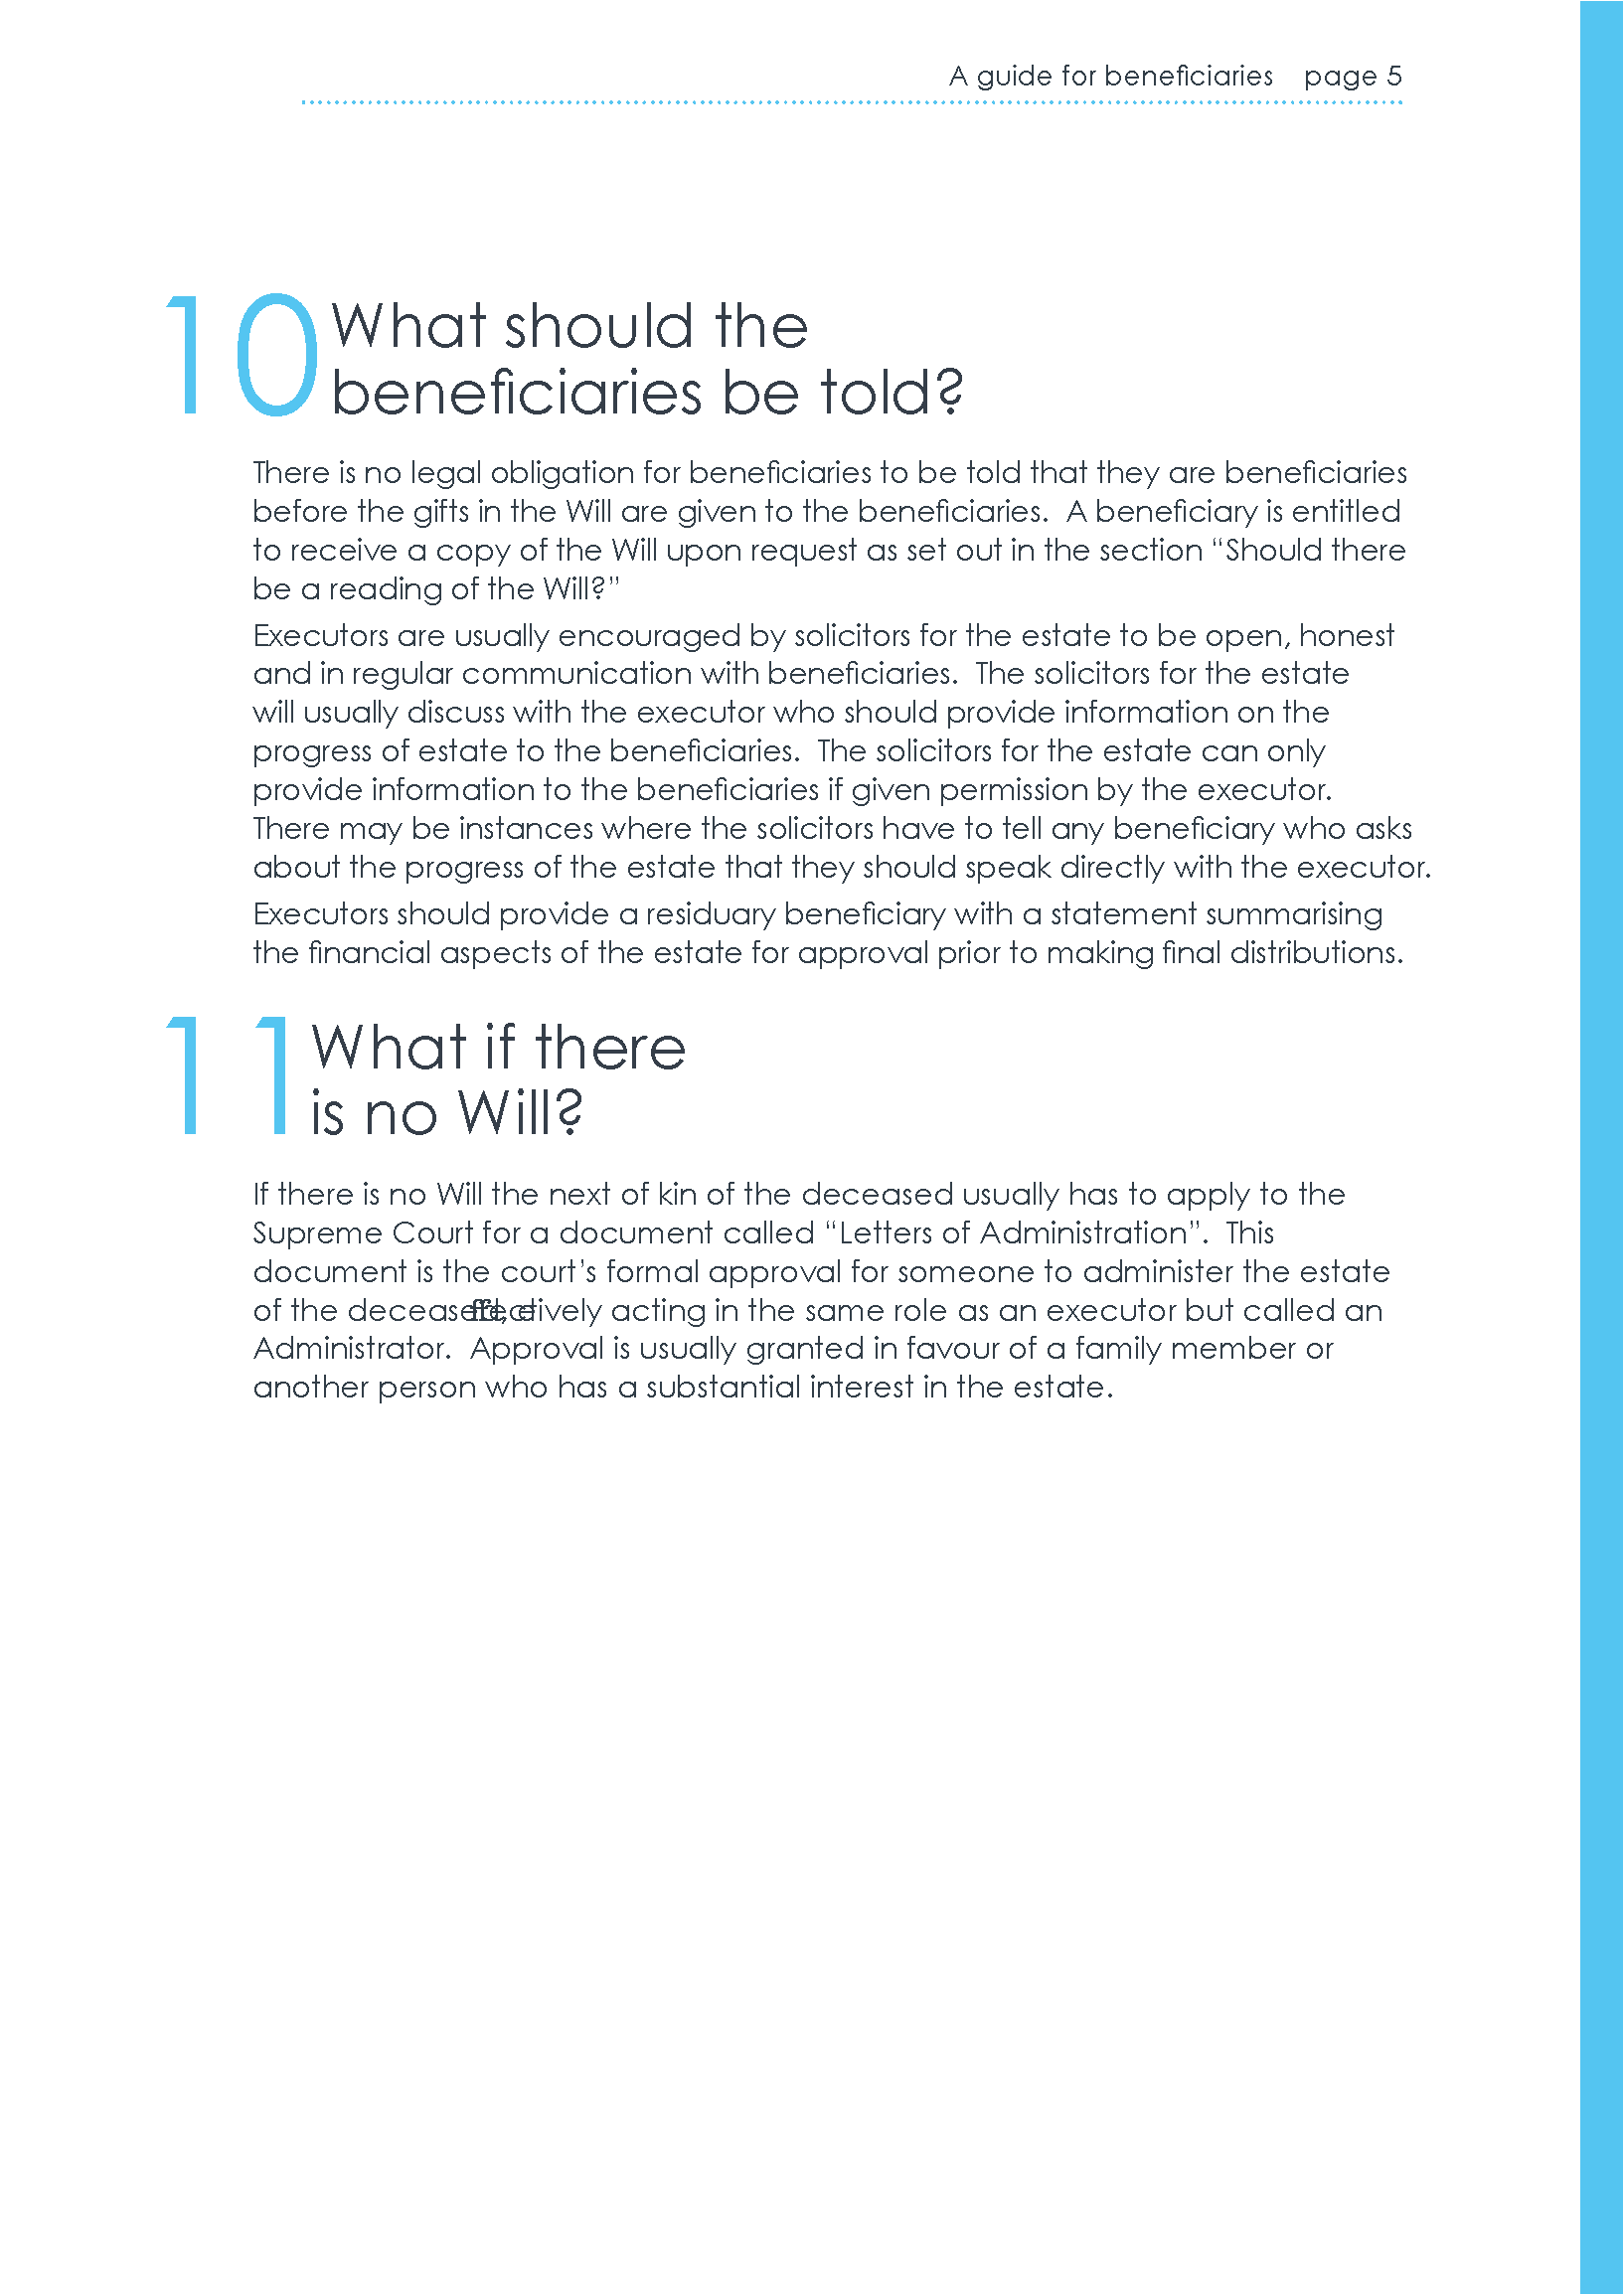 A-Guide-for-Beneficiaries-min_Page_07.png